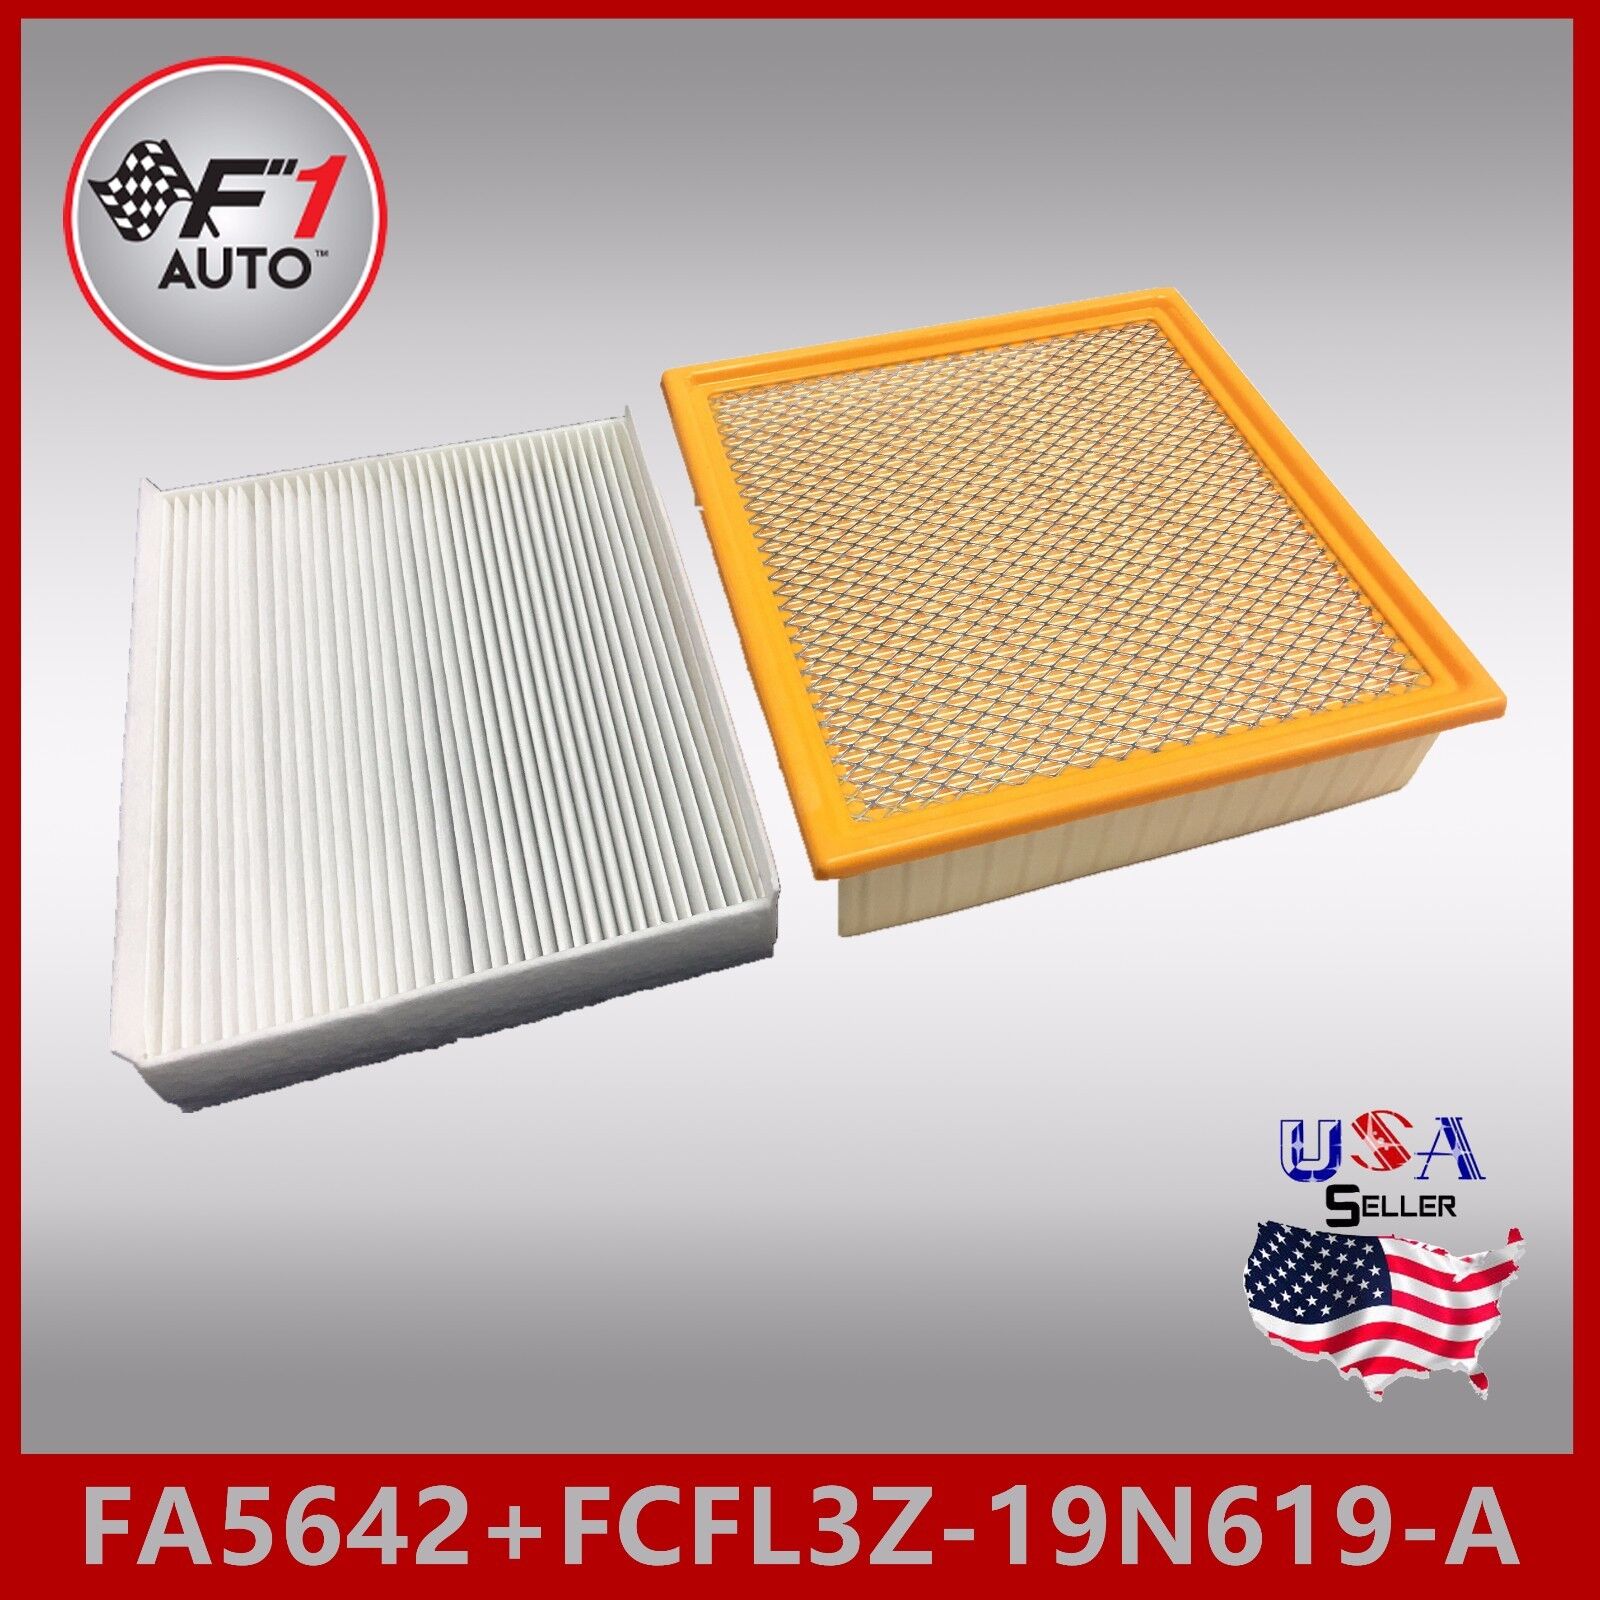 Car & Truck Filters AIR FILTER AF5642 FOR FORD F-150 F-250 F-350 PACKAGE OF TWO OVER 600 2001 Ford F150 Cabin Air Filter Kit